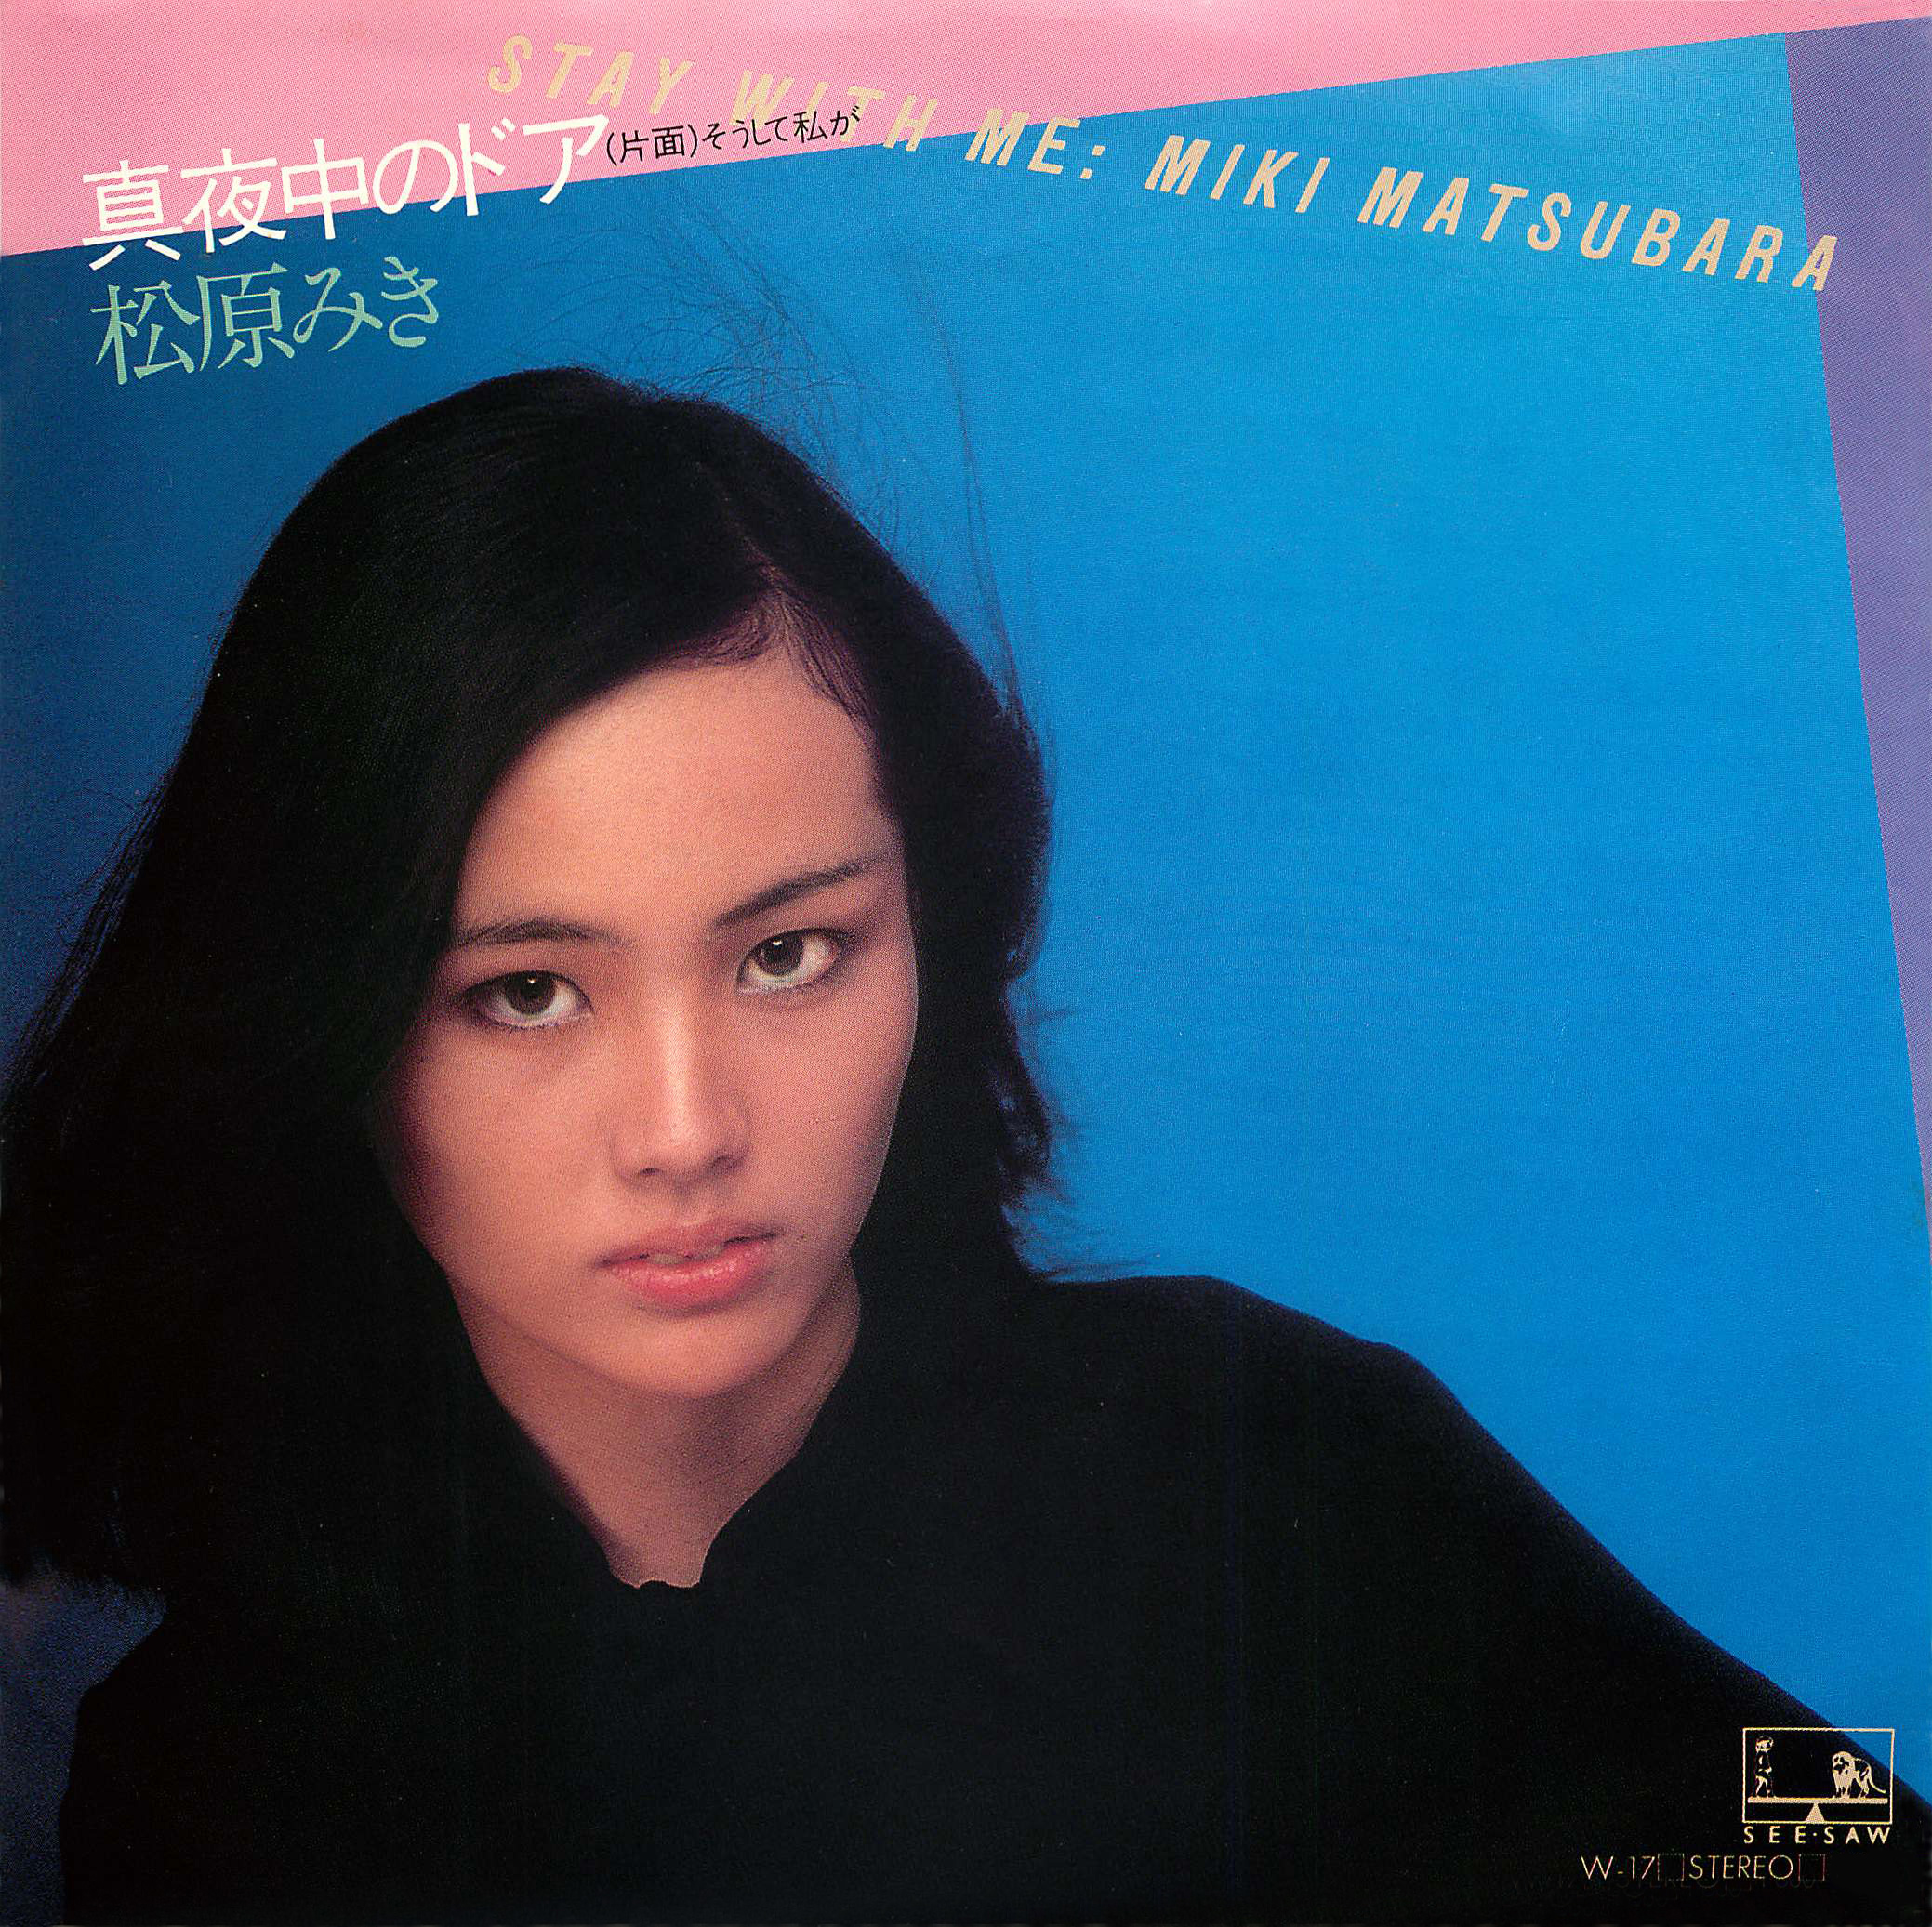 Matsubara Miki (7-inch single Vinyl) "Mayonaka no Door / Stay With Me" Release on March 31st 2021 No.1